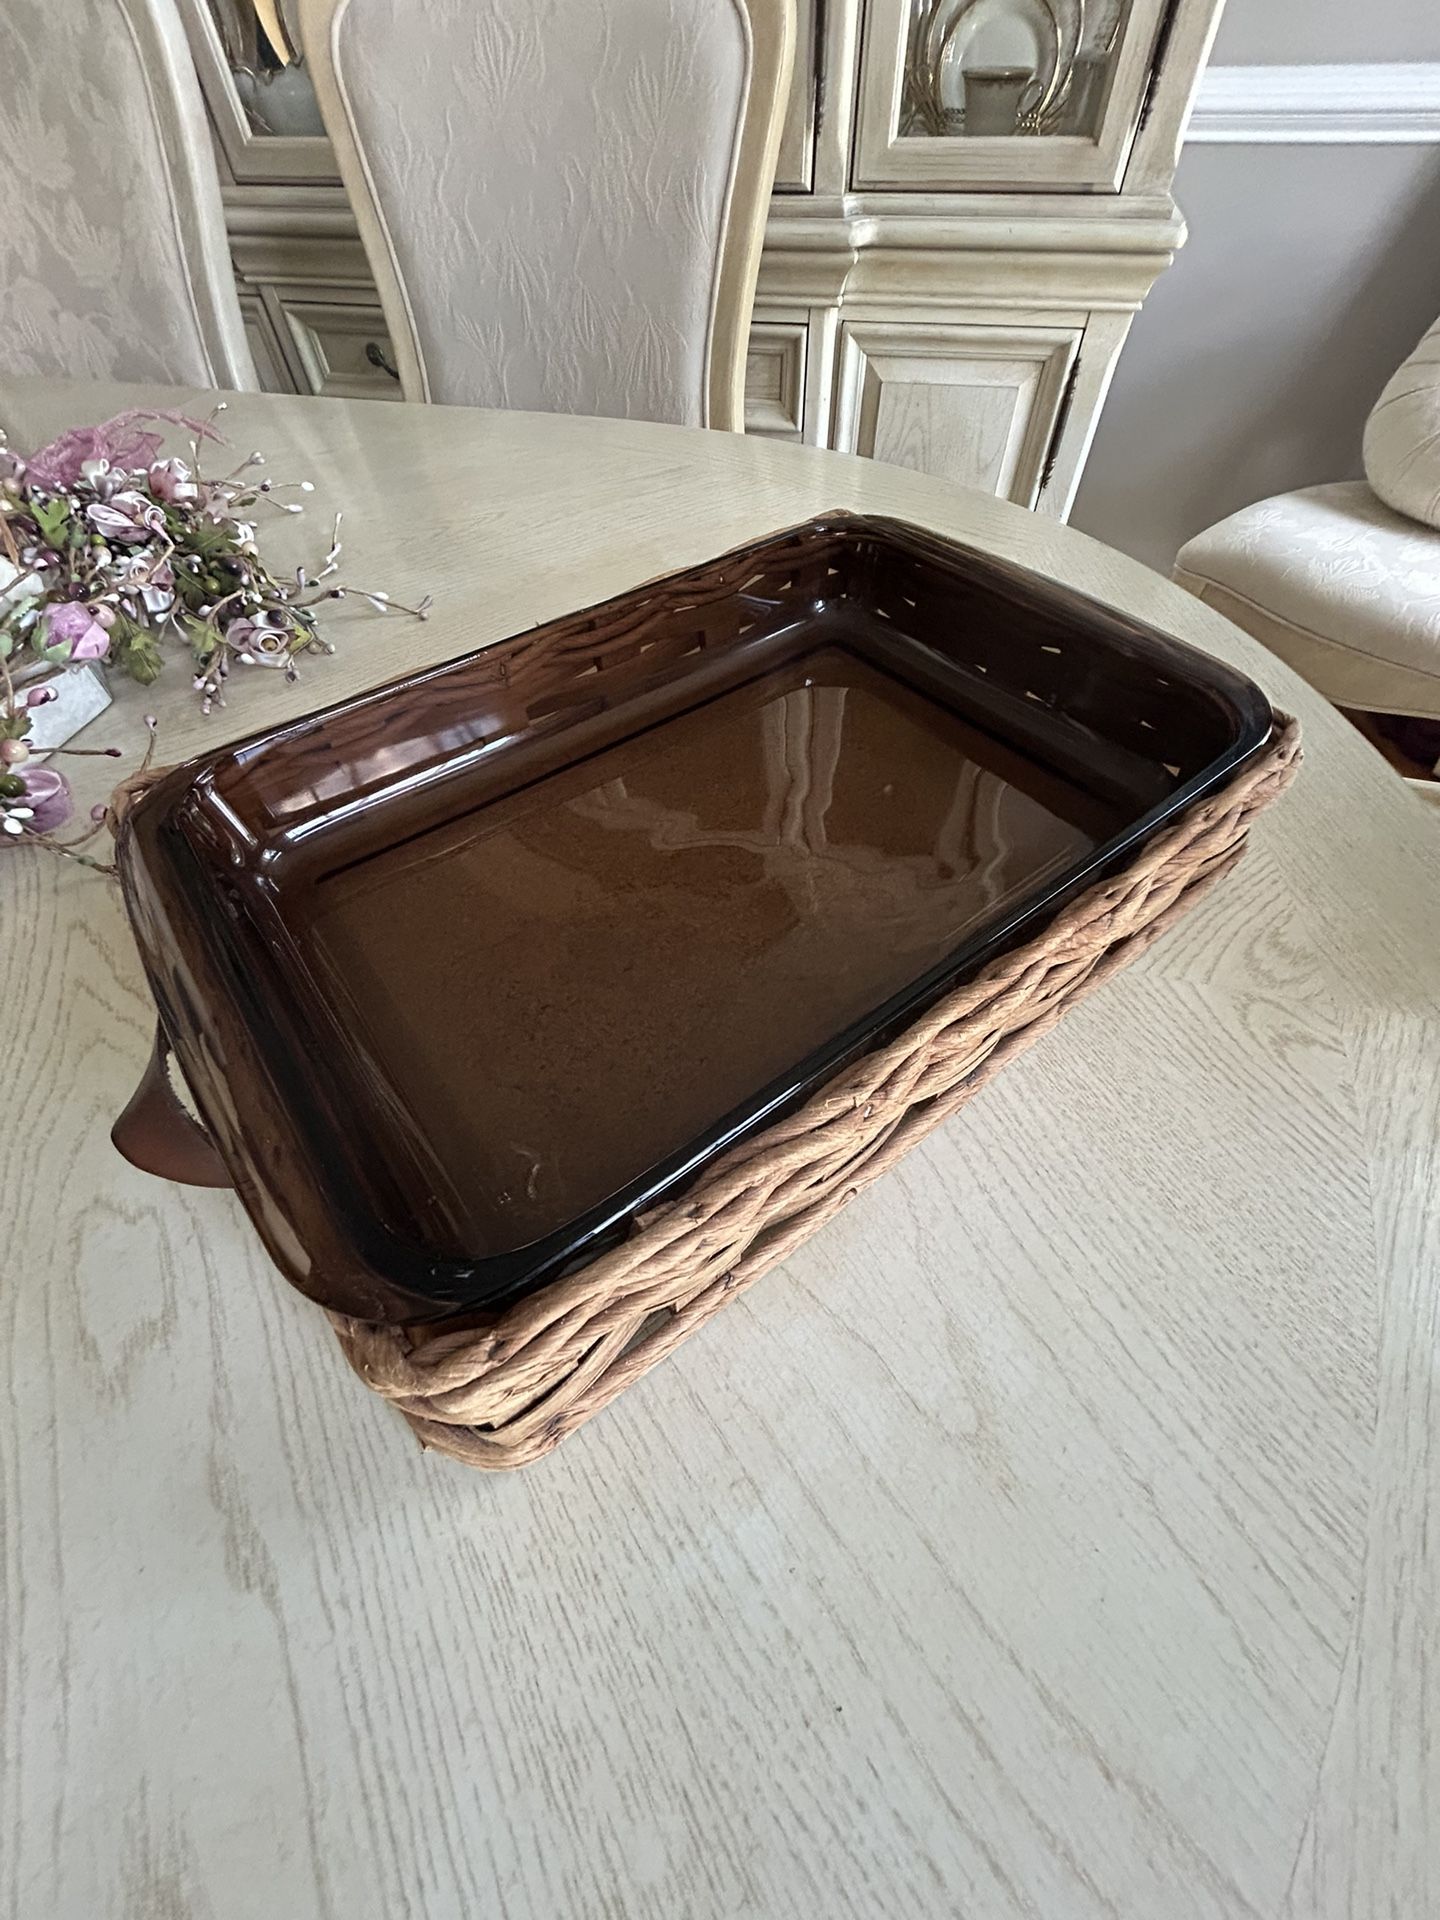 PYREX 233-NBaking Dish with Wicker with Leather Handles  9x13